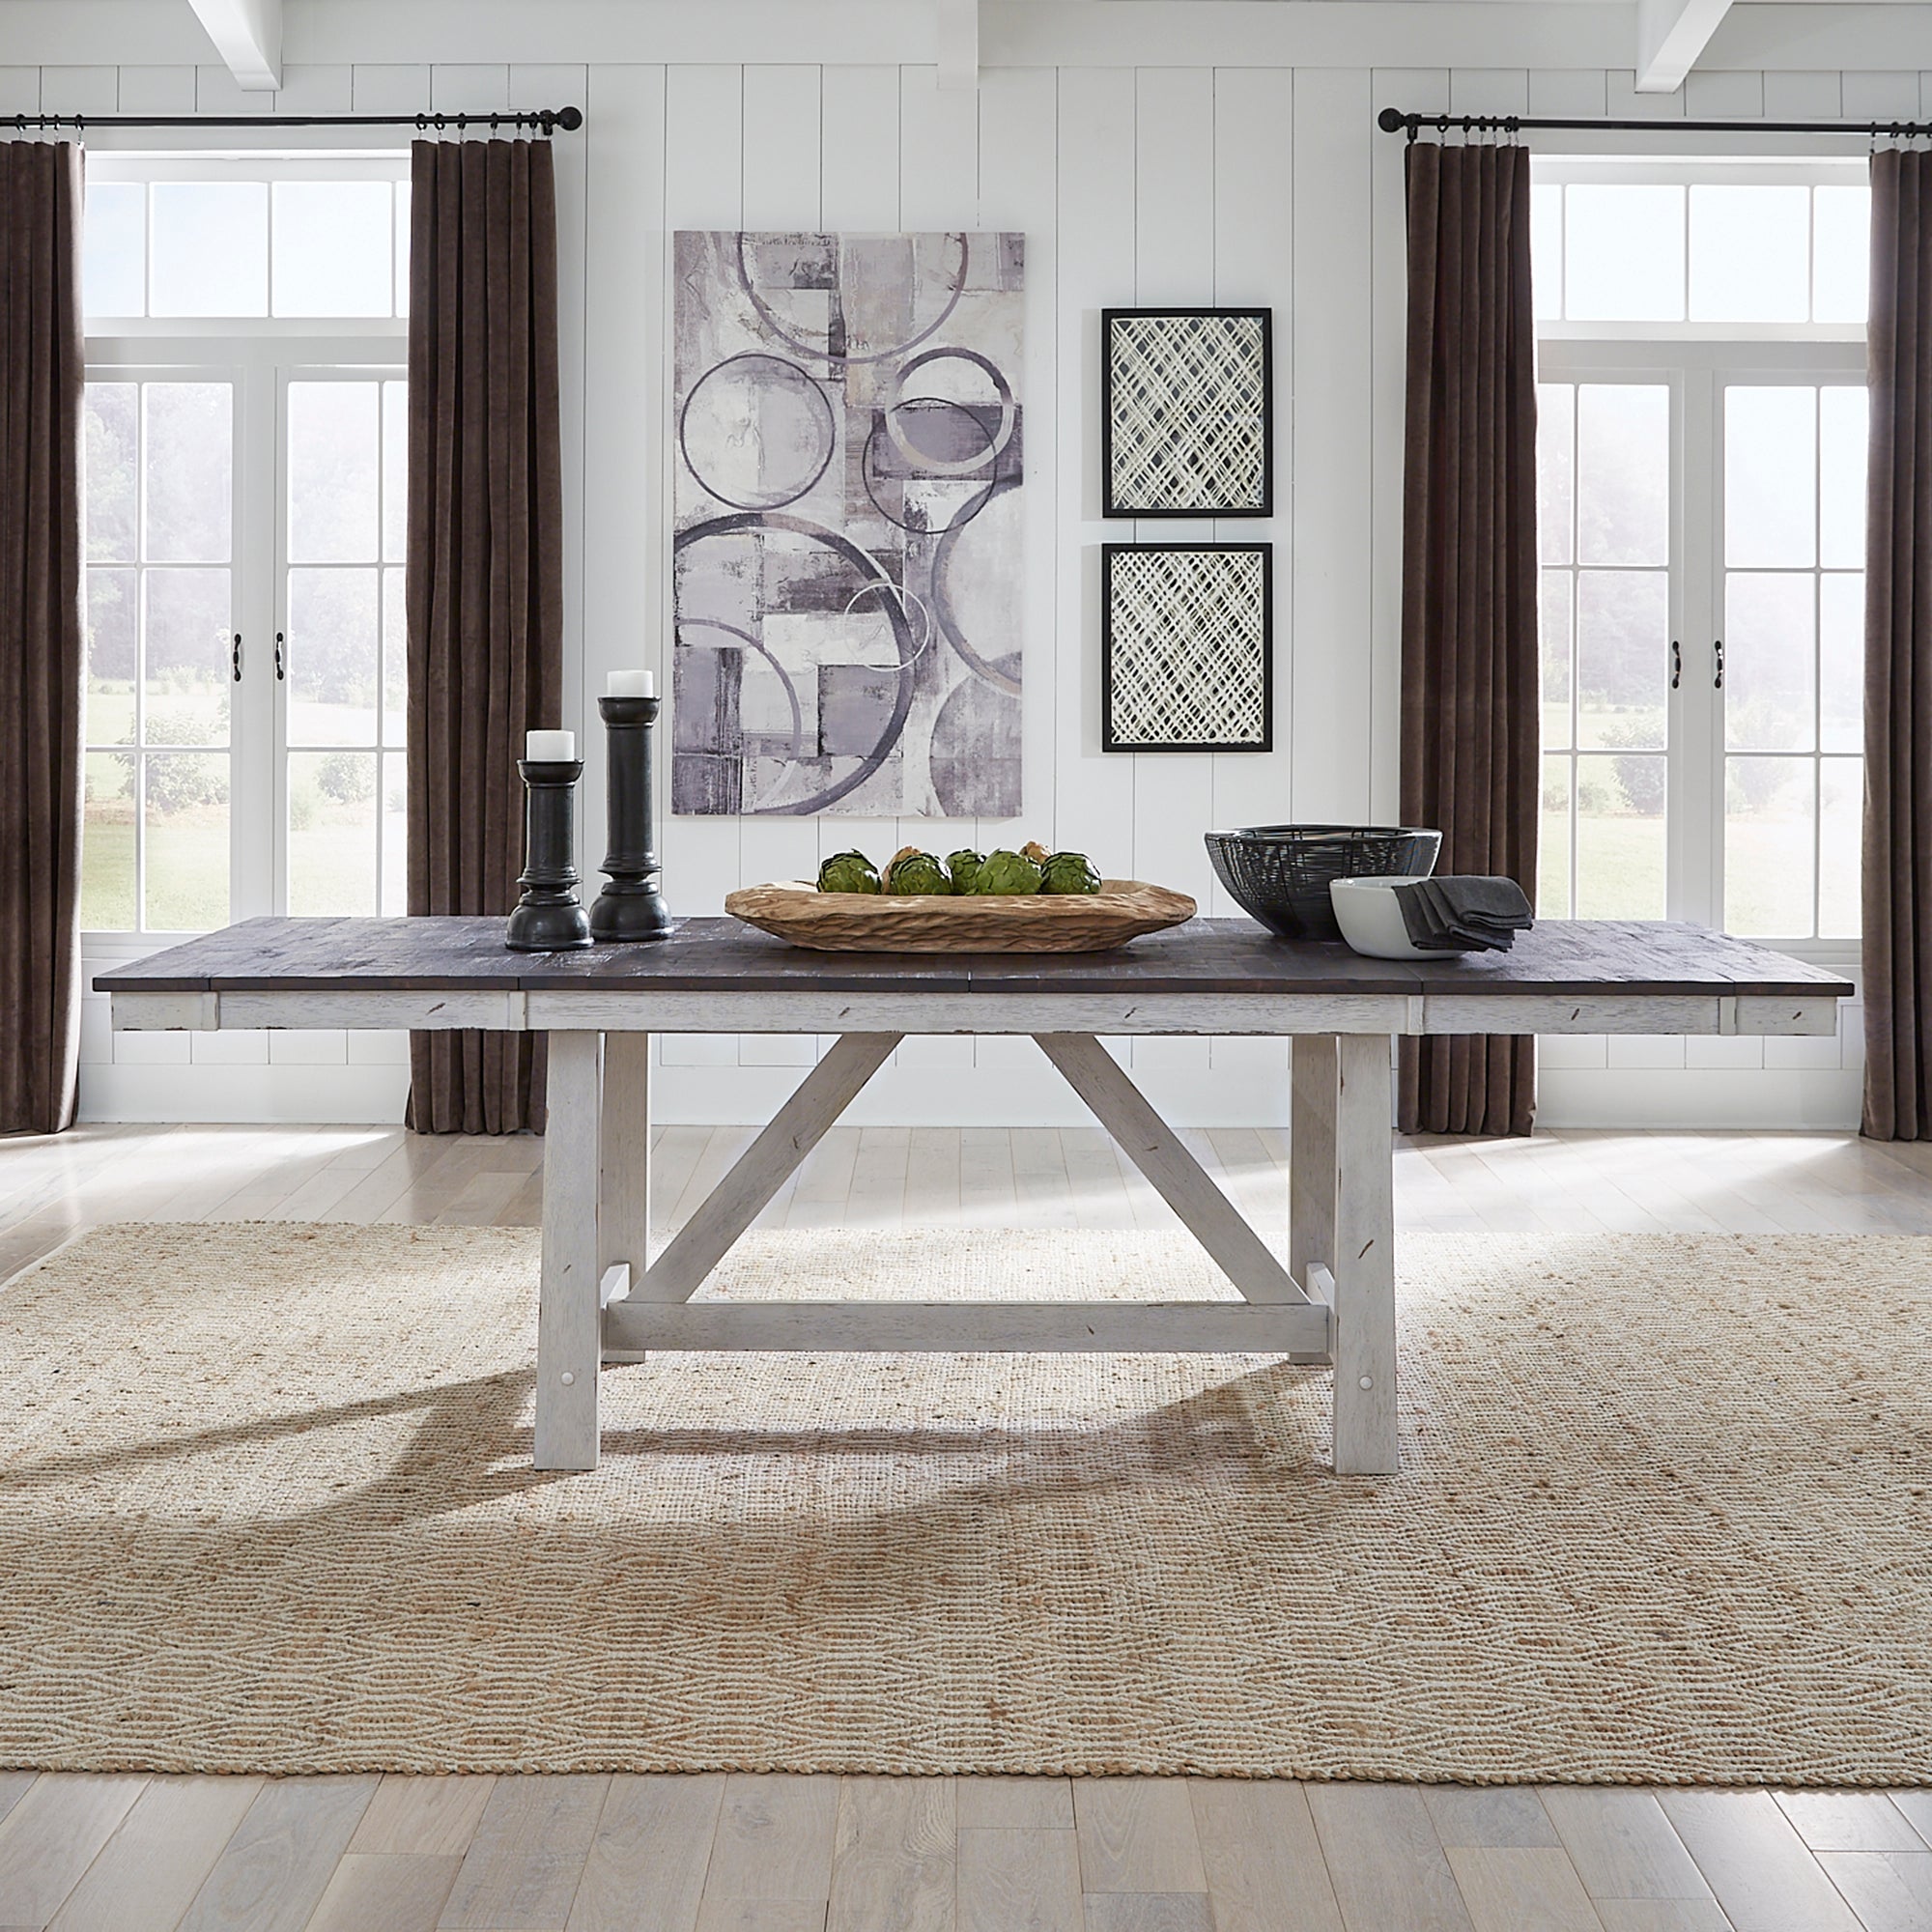 Liberty Furniture 139WH-T4002 Trestle Table